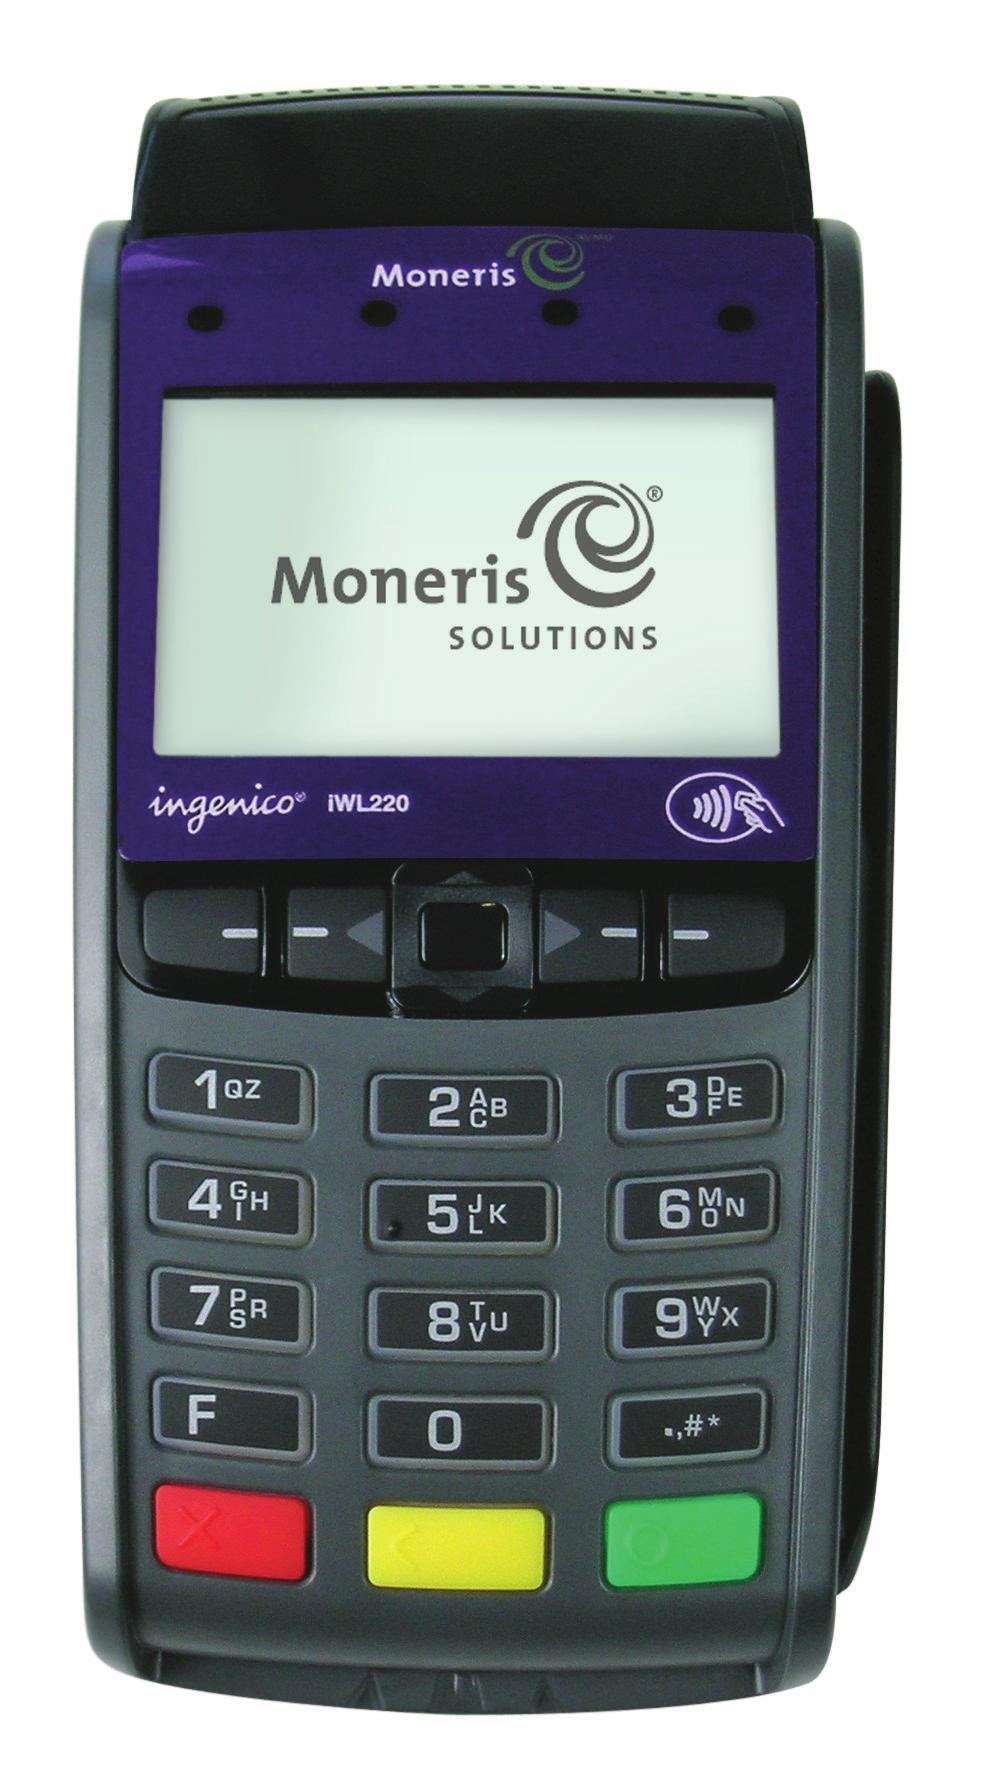 Moneris iwl220 Short-Range Mobile Use this handheld, all-in-one terminal to process transactions at the point of sale (POS).